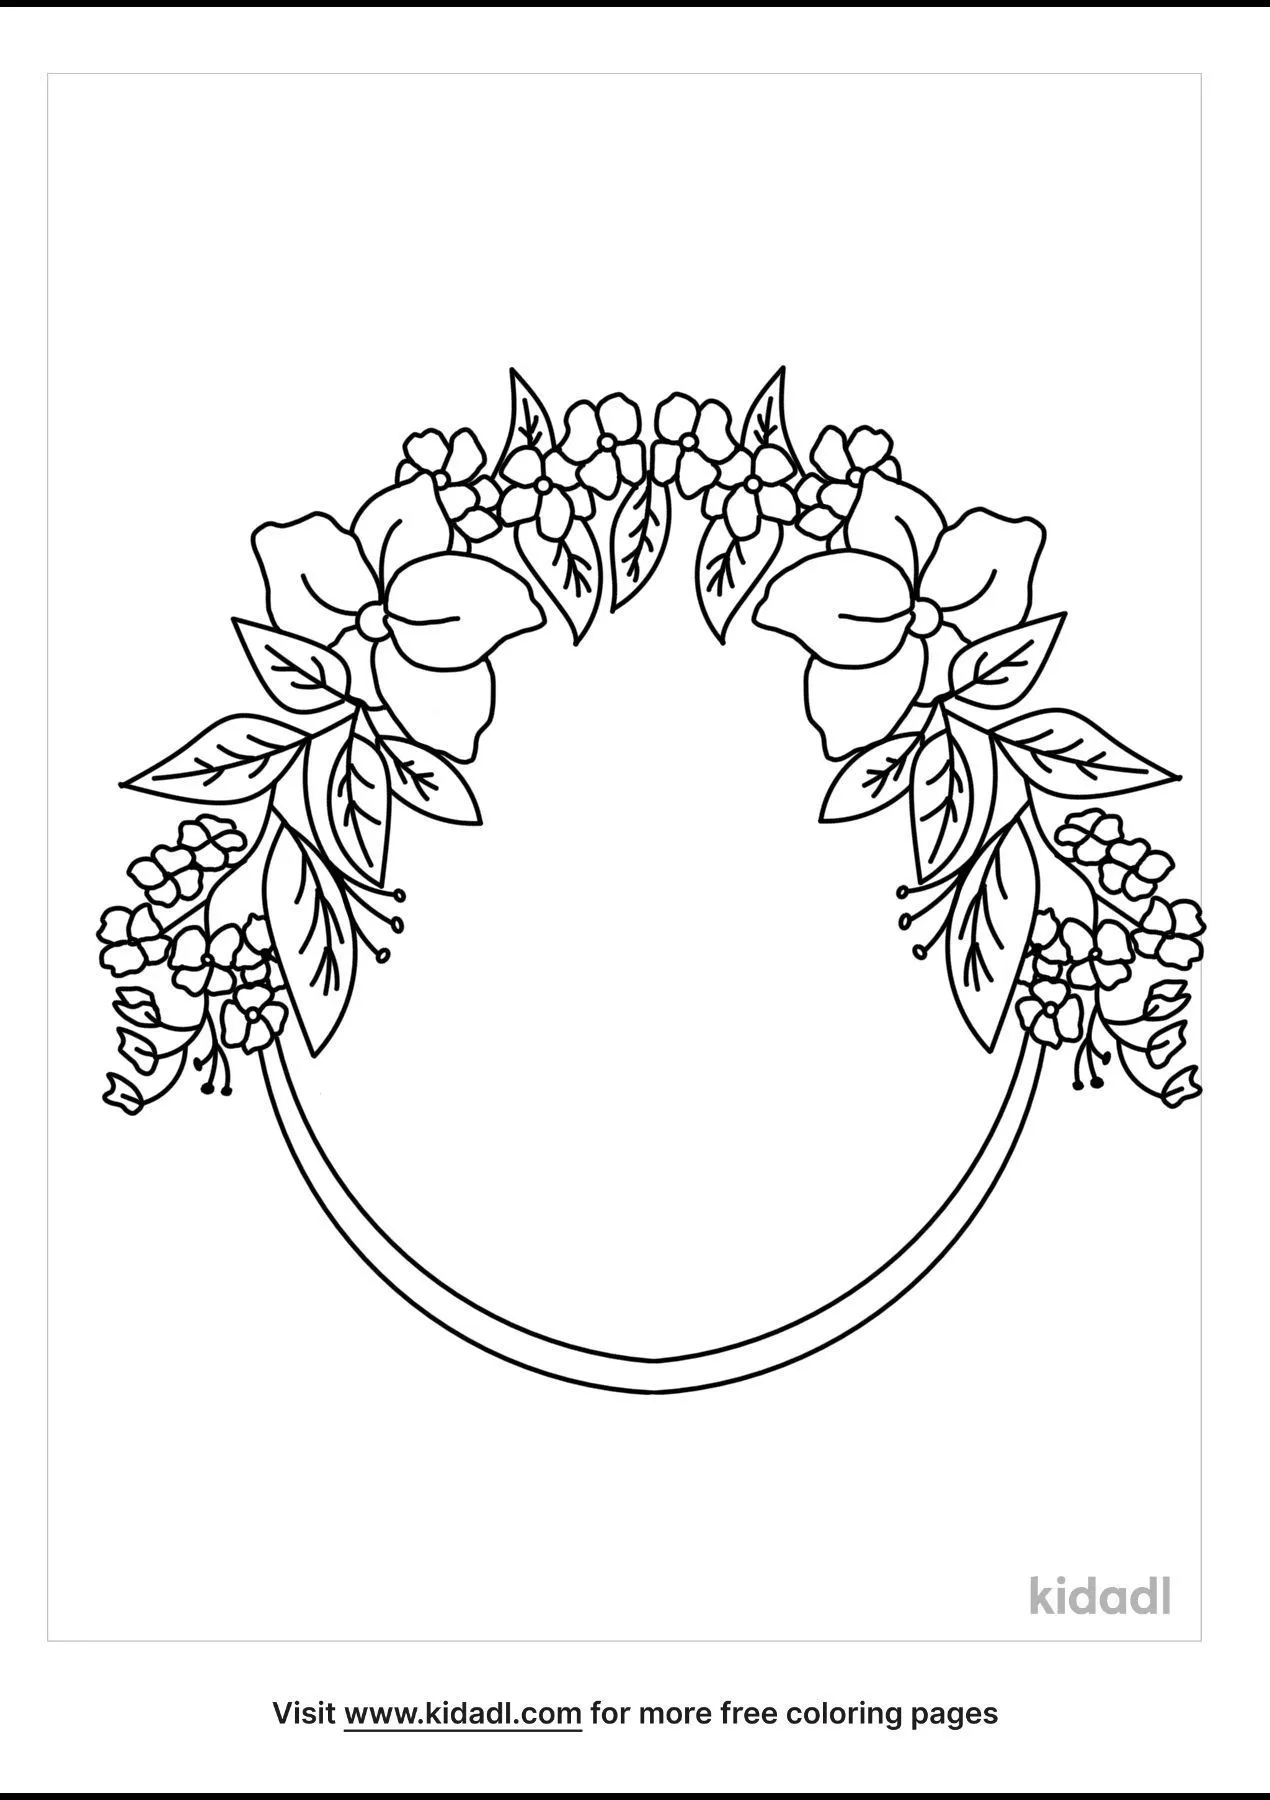 Flower Wreath Coloring Pages Free Flowers Coloring Pages Kidadl